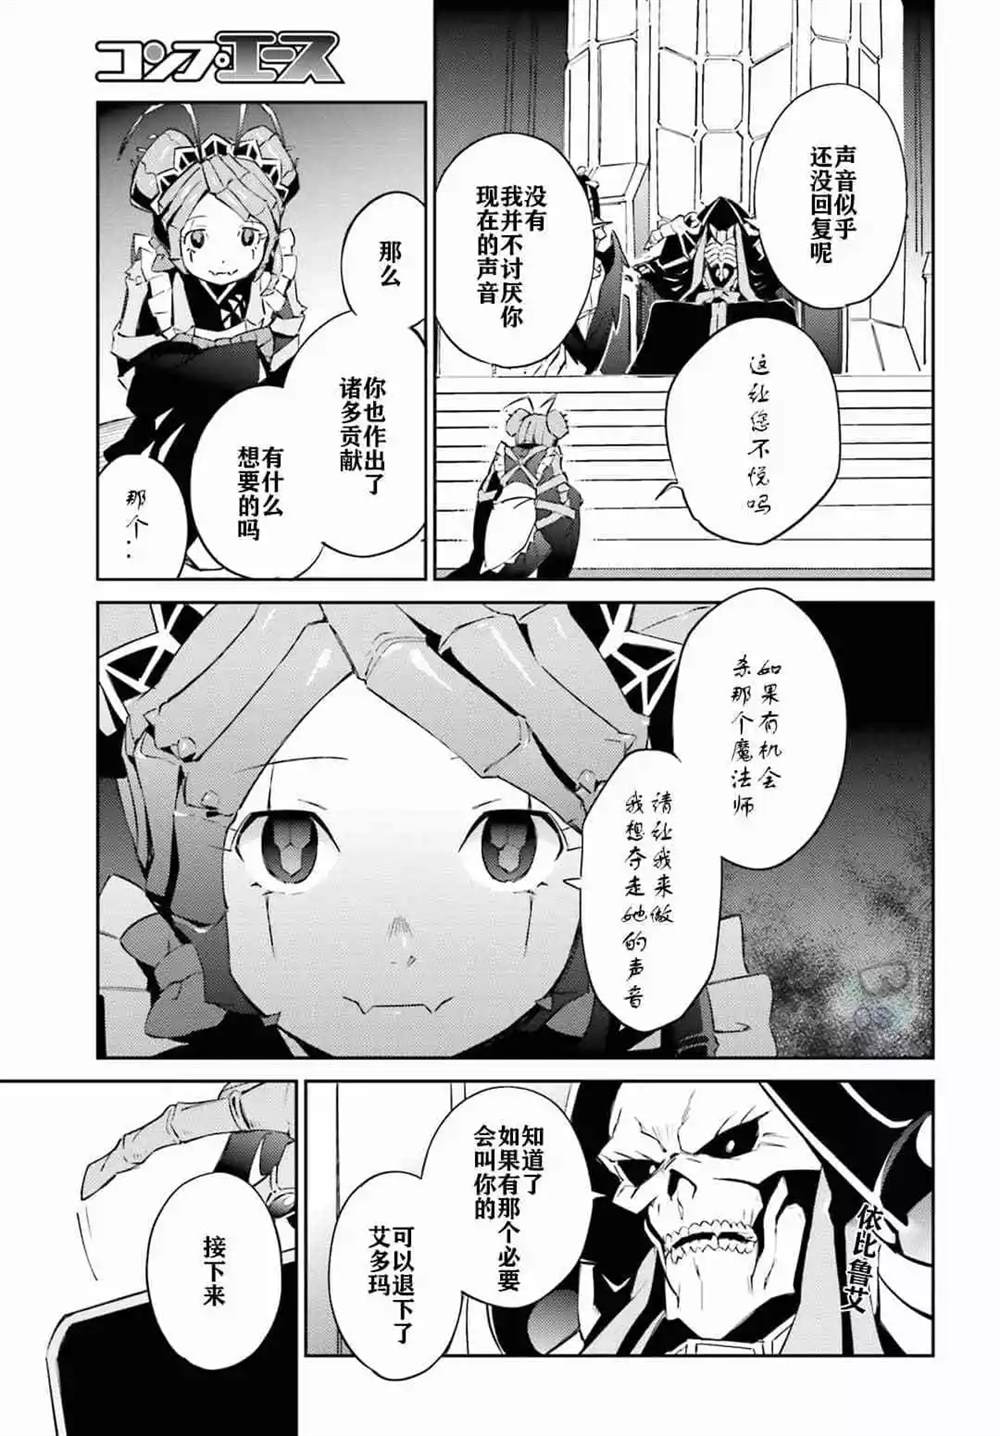 OVERLORD - 第53話 - 5